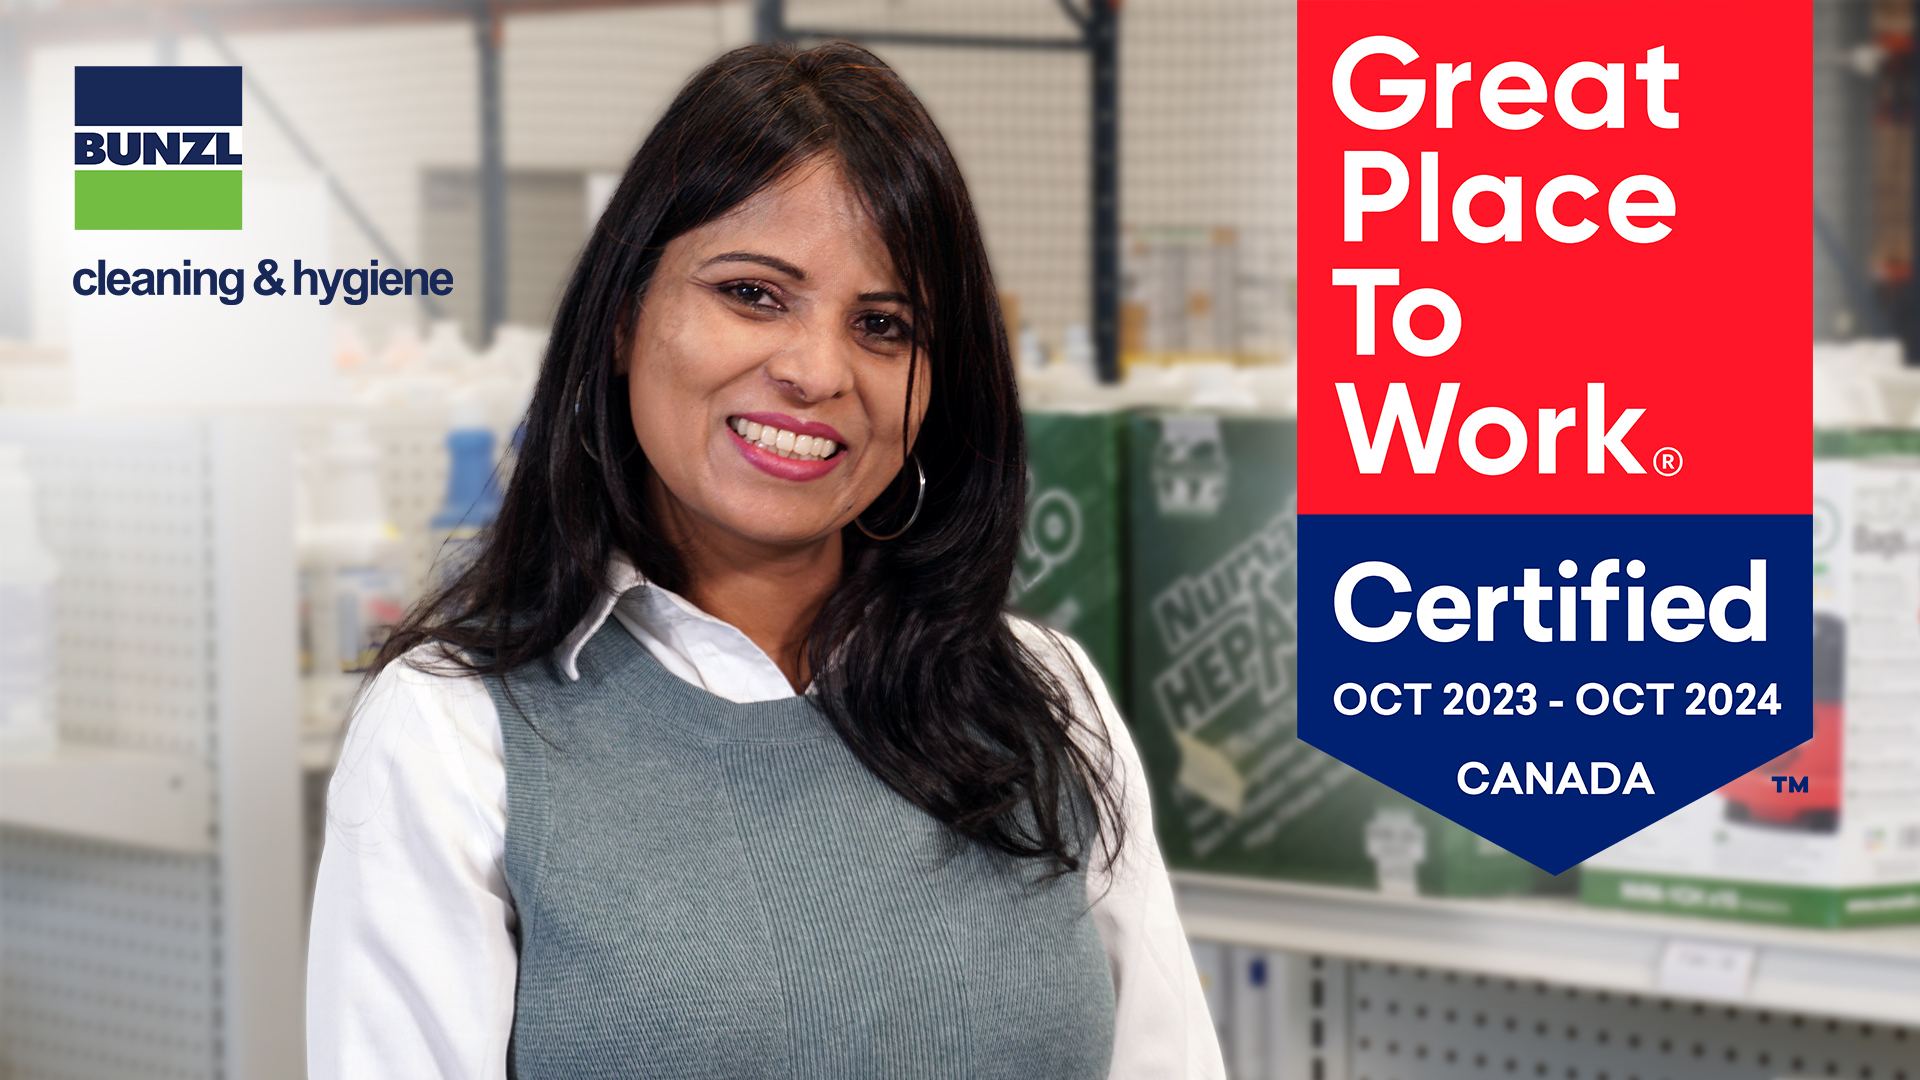 Bunzl Cleaning & Hygiene Awarded Great Place to Work Certification™